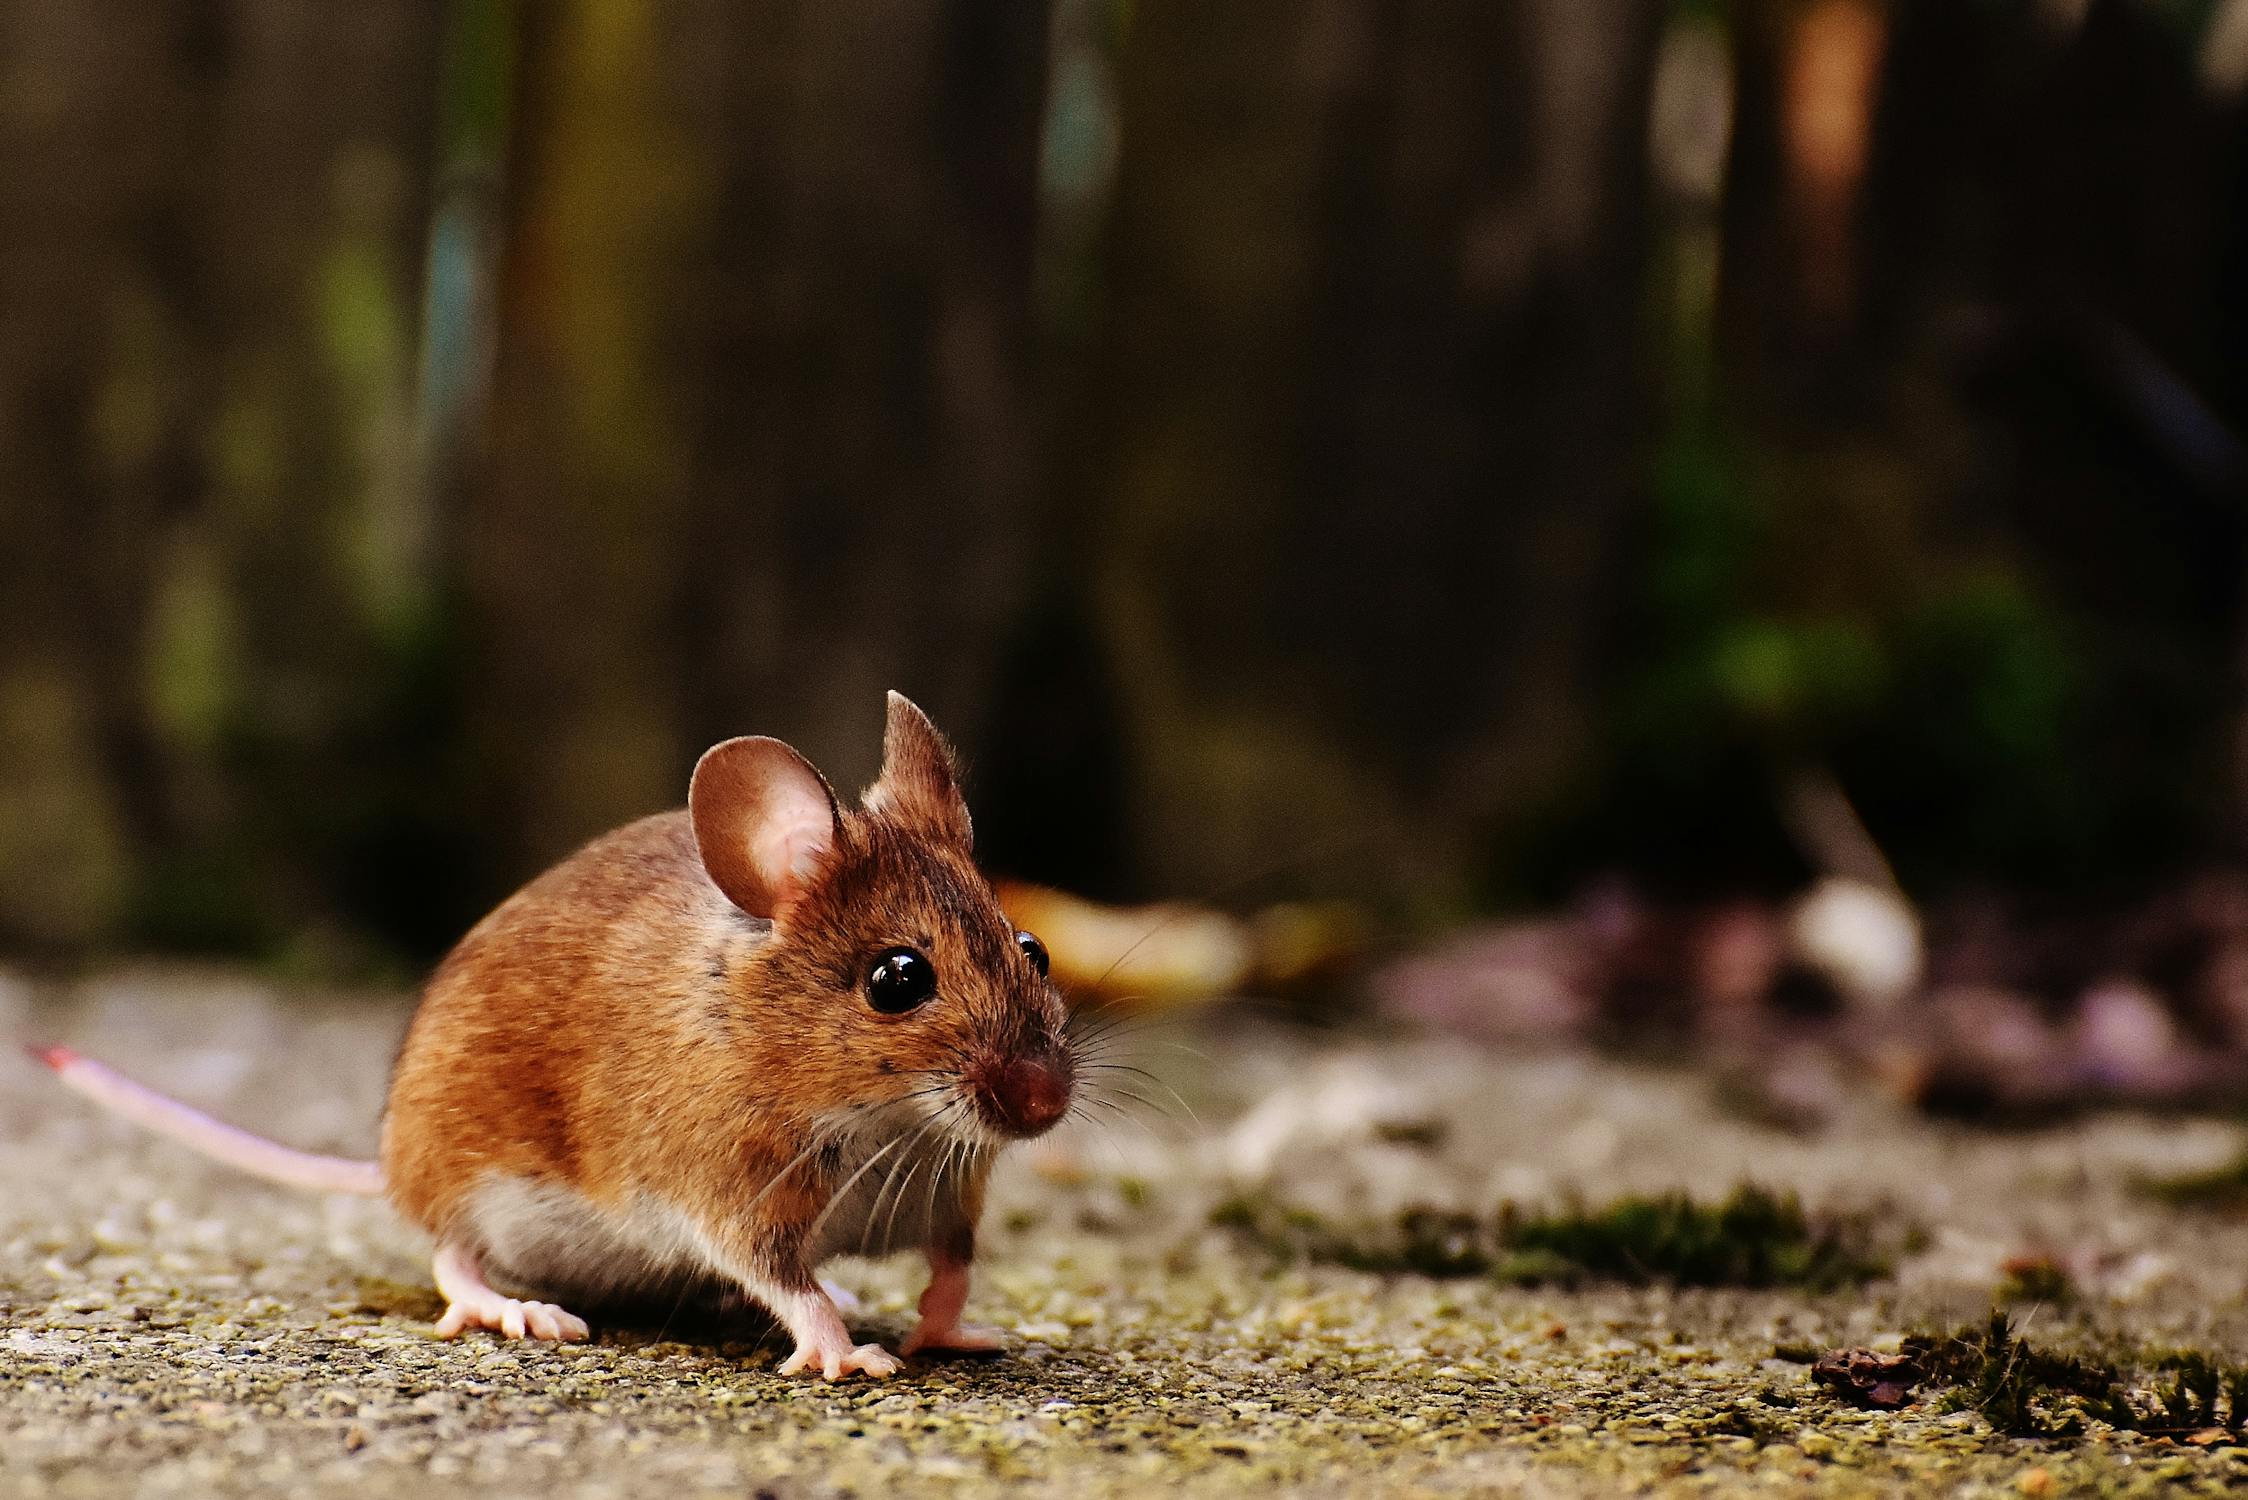 Mouse in forrest Photo by Alexas Fotos from Pexels: https://www.pexels.com/photo/brown-and-white-mice-2280794/